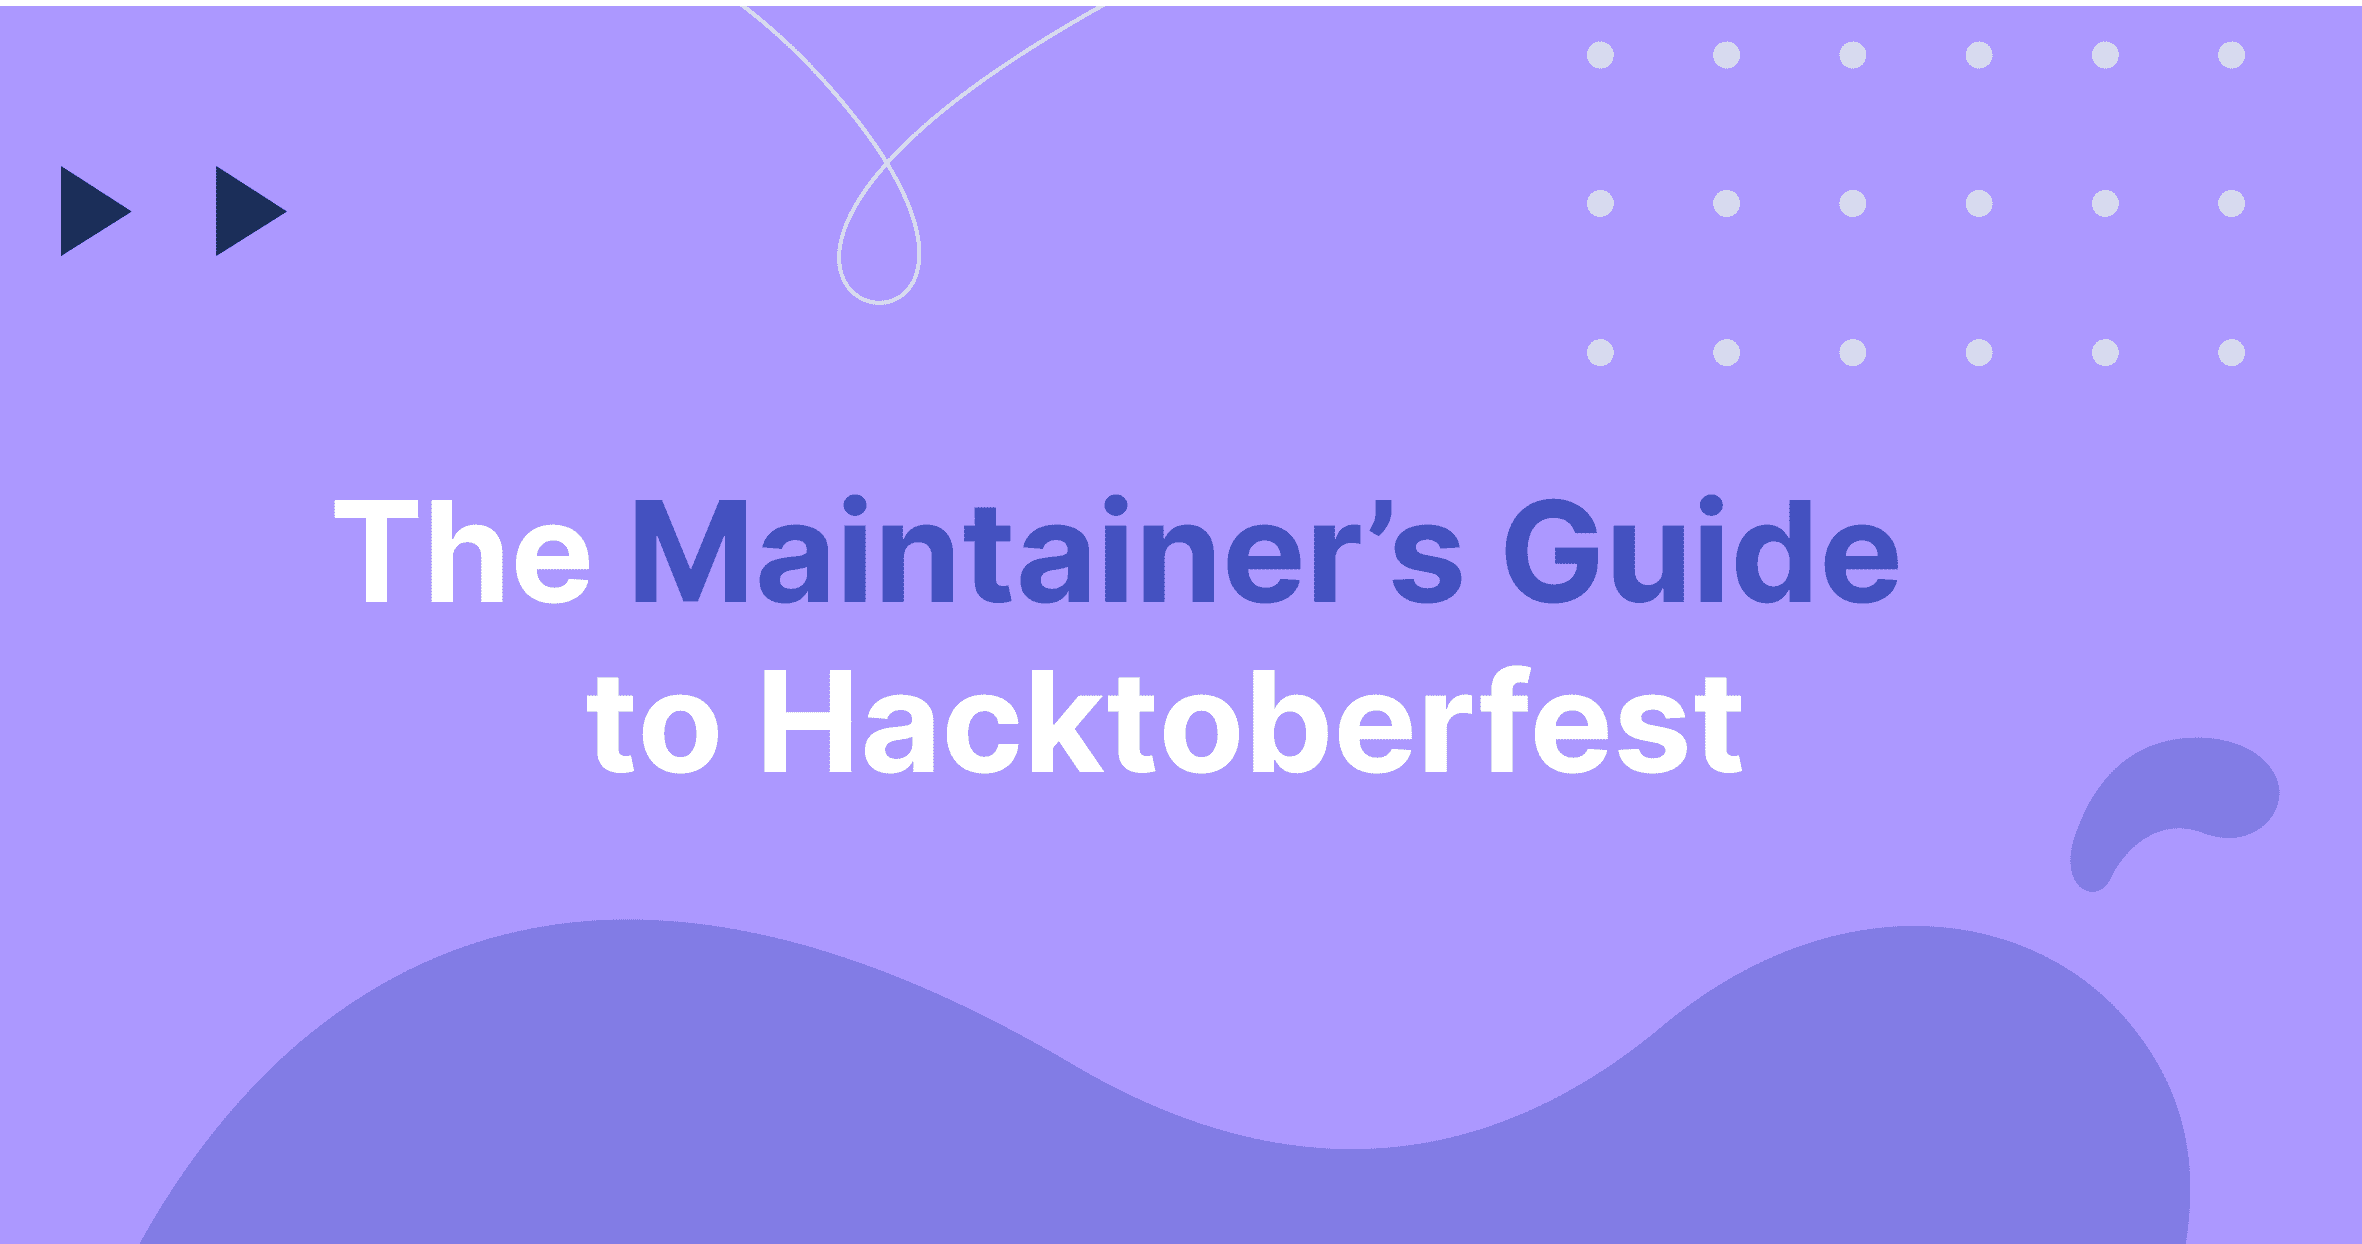 The Maintainer's Guide to Hacktoberfest